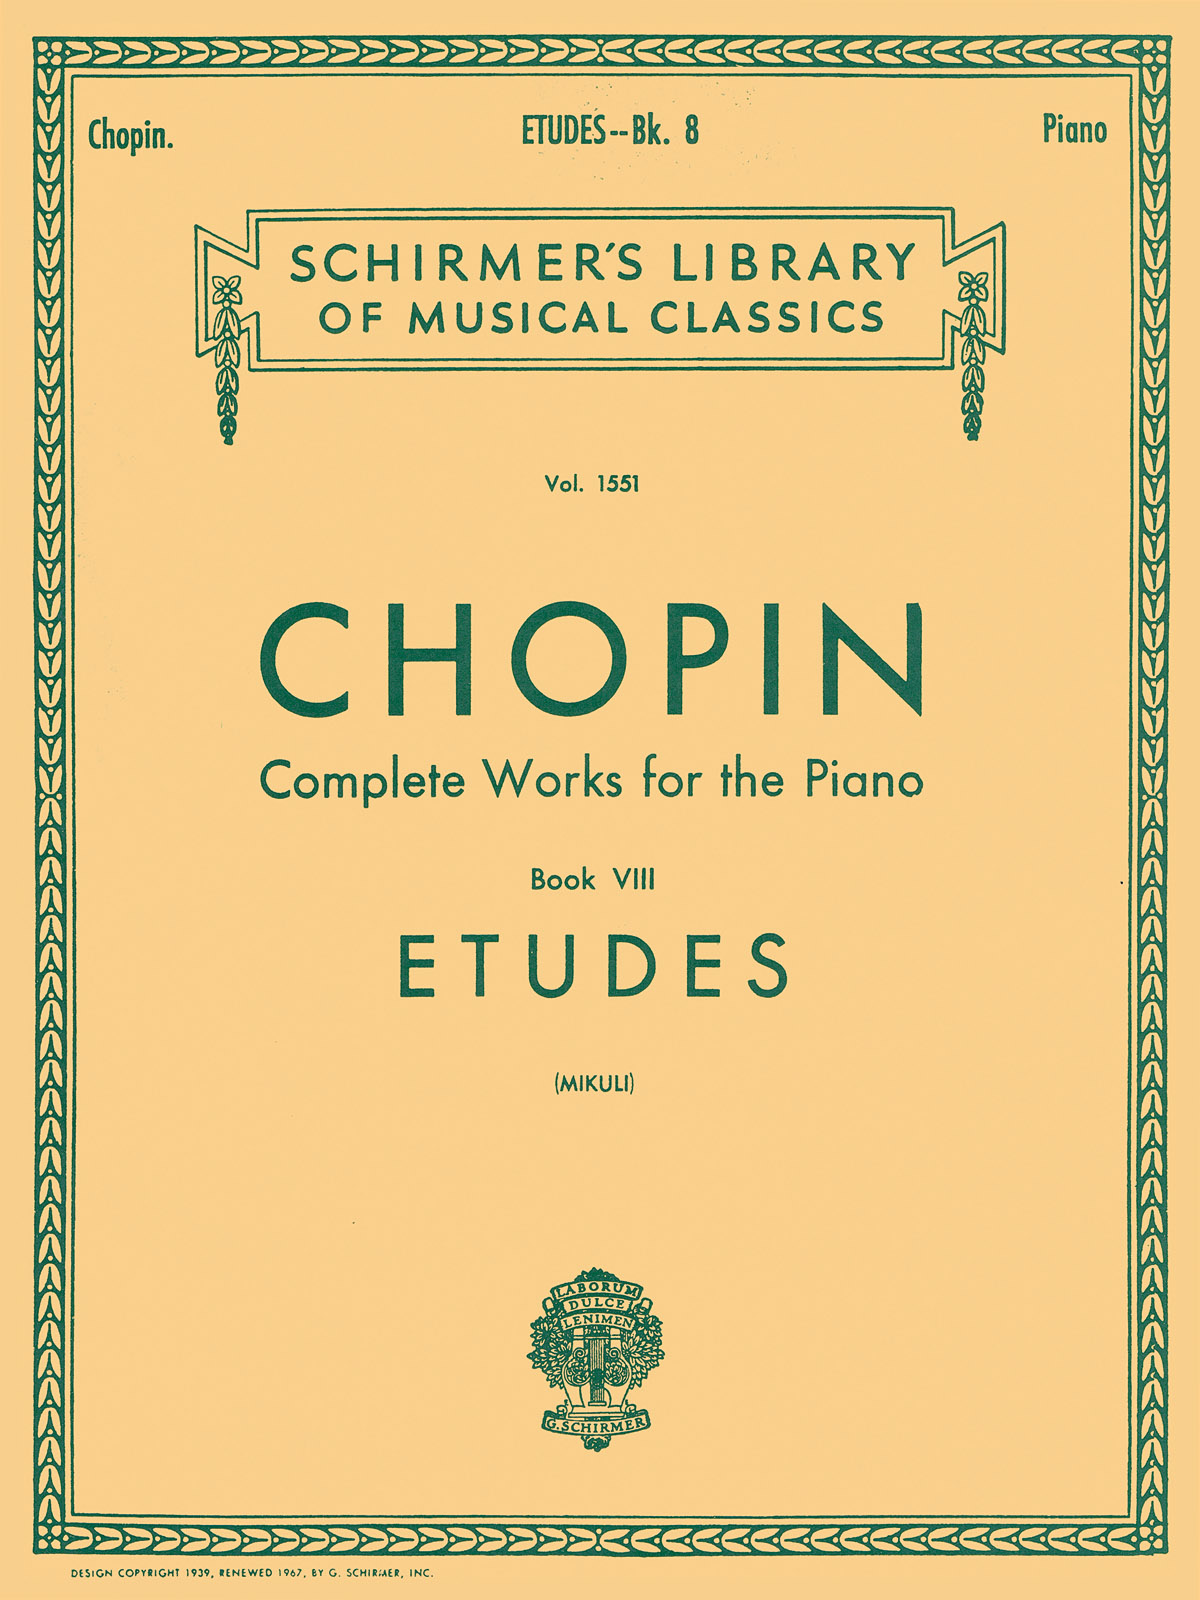 Chopin:  Complete Works For The Piano Book VIII Etudes